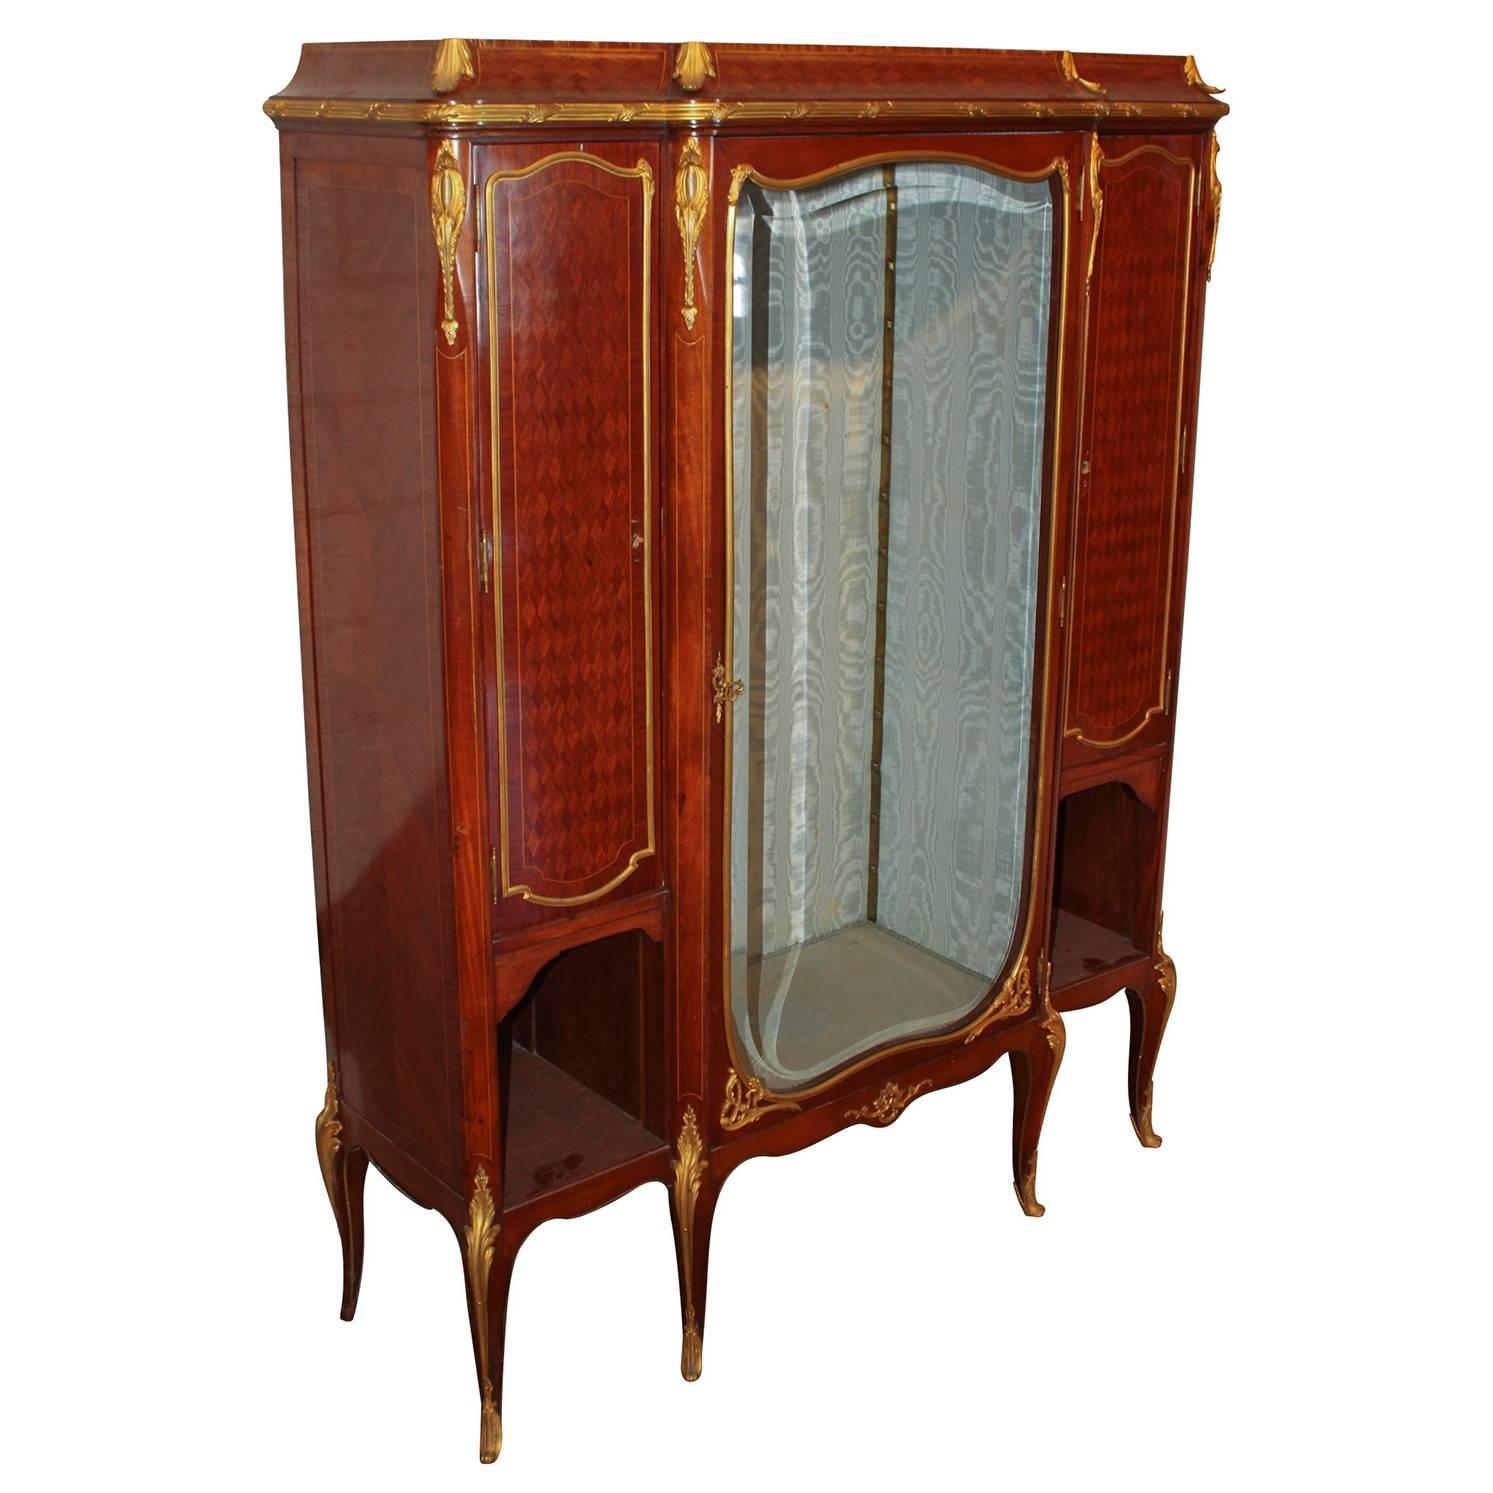 19th Century French Kingwood Parquetry Vitrine Cabinet